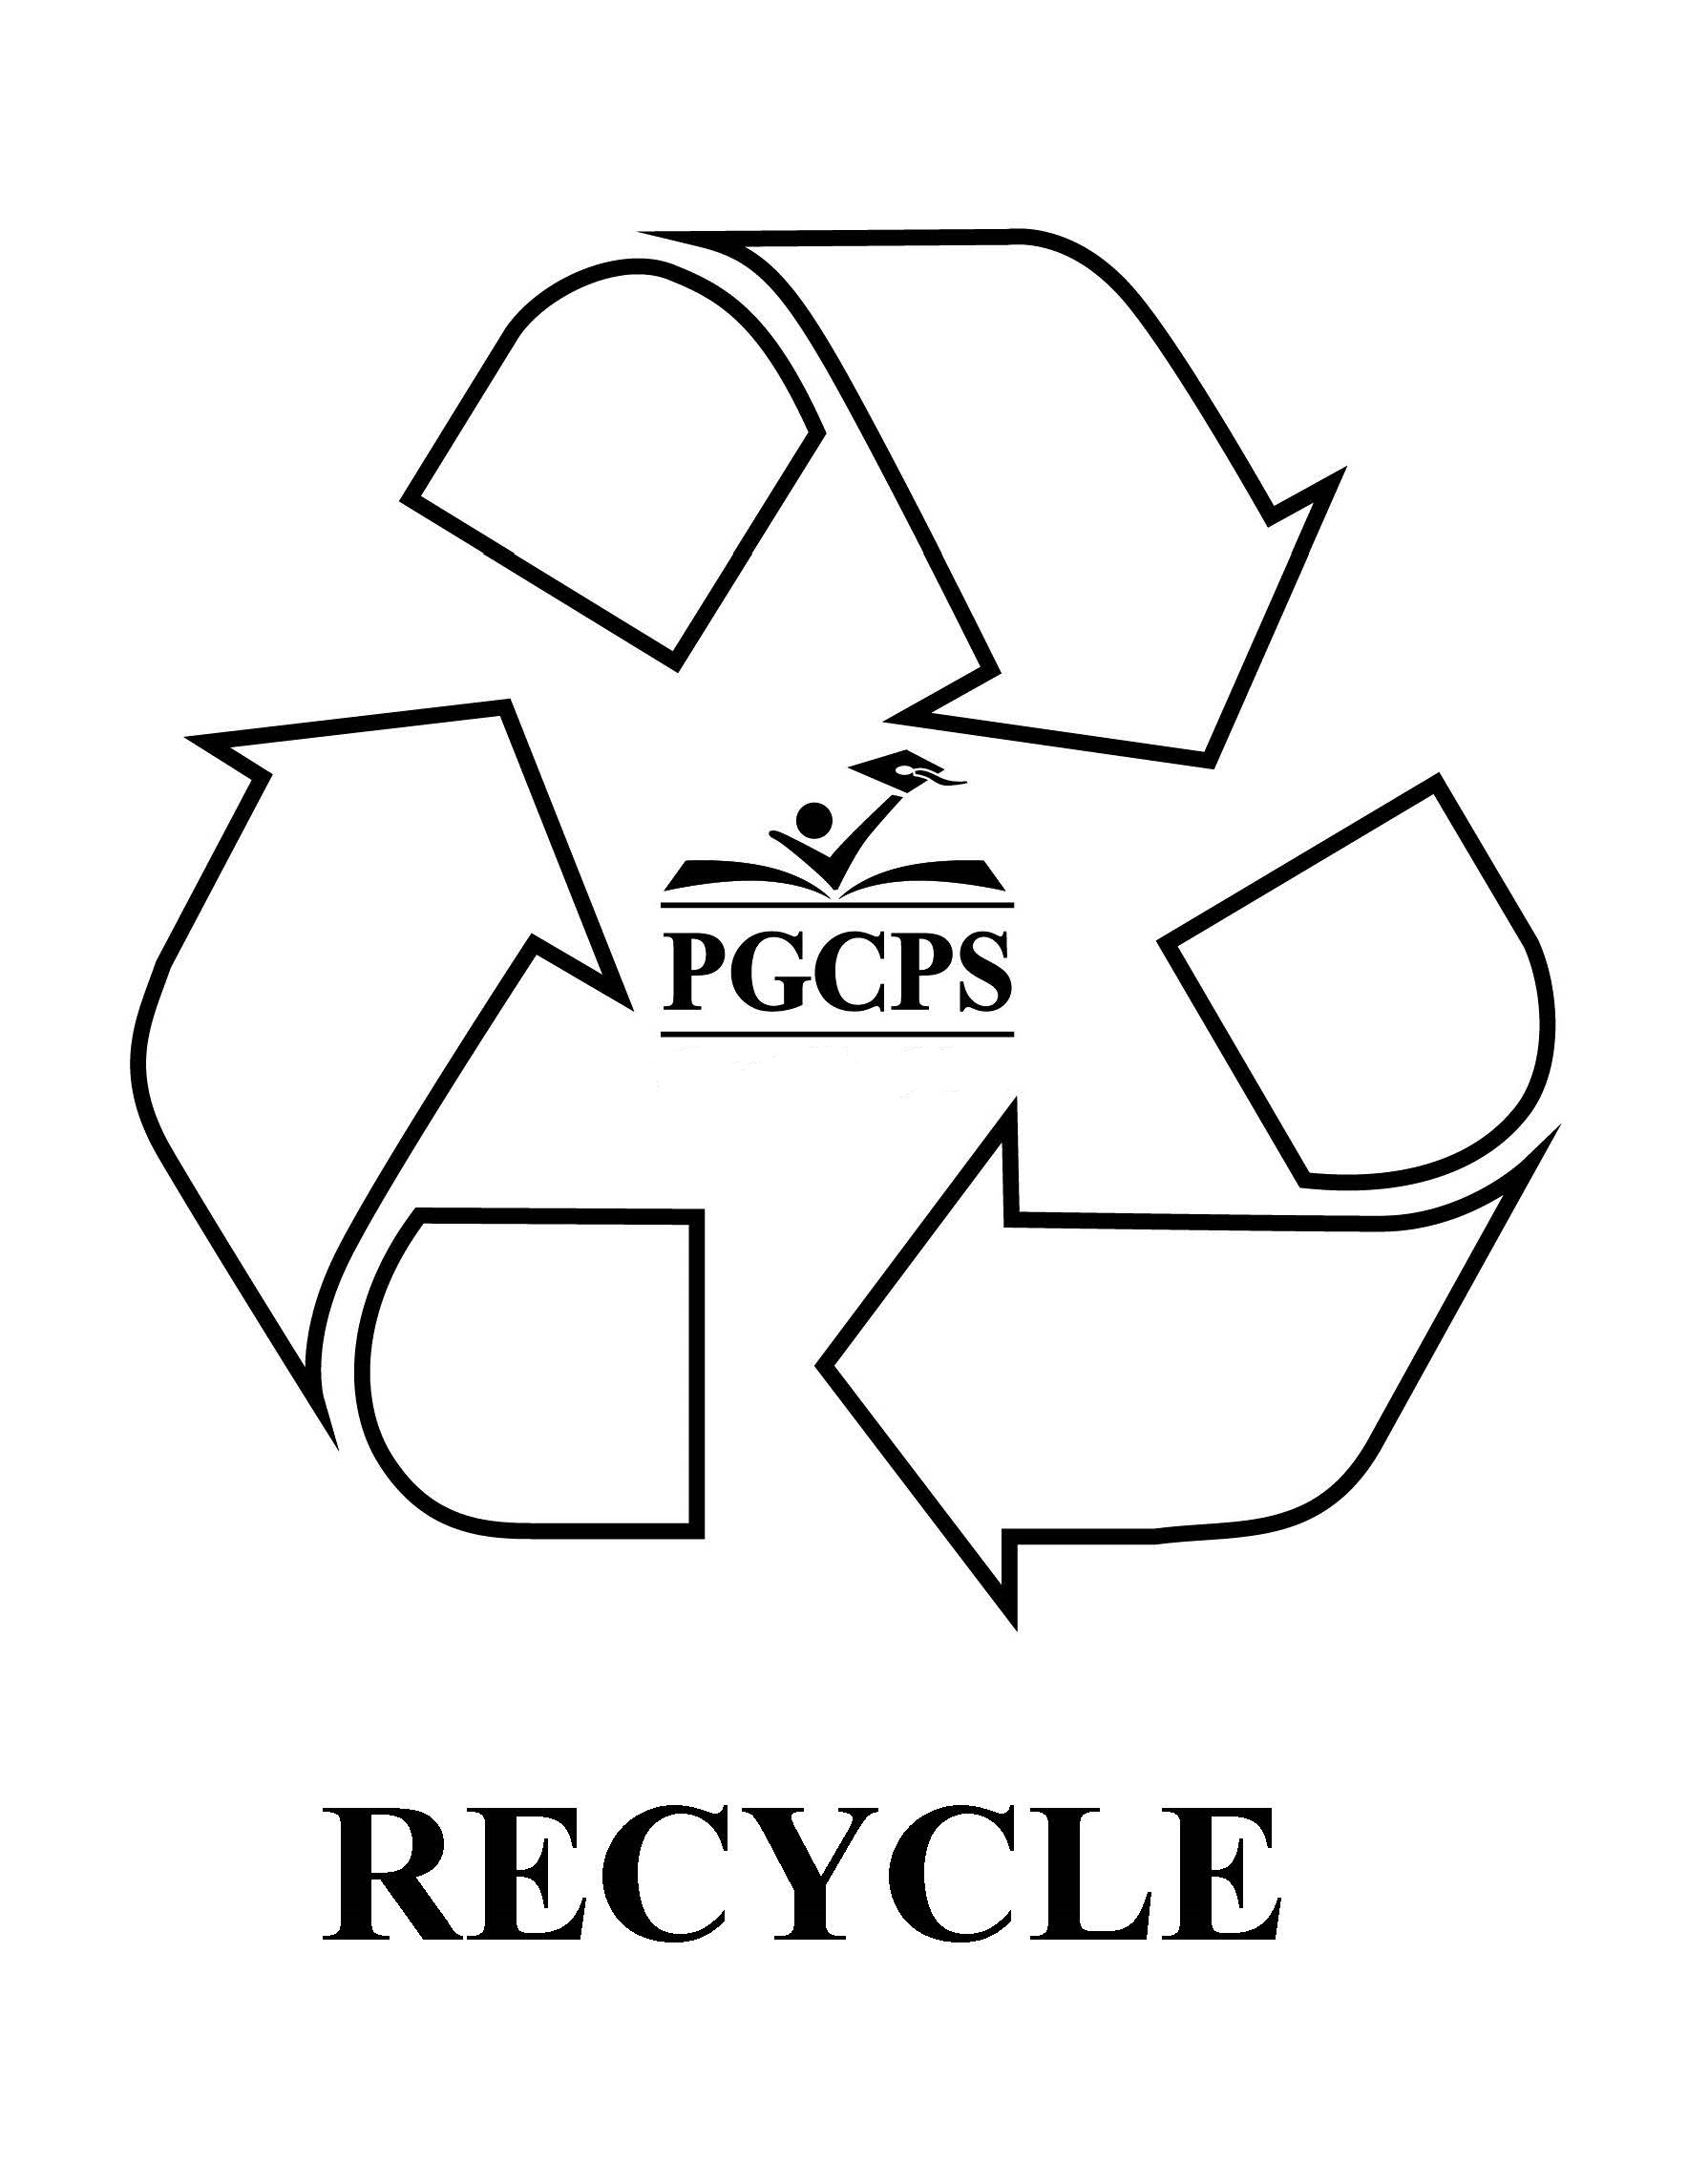 Recyclling Bin Label-Poster_Black and White_Updated Logo.jpg